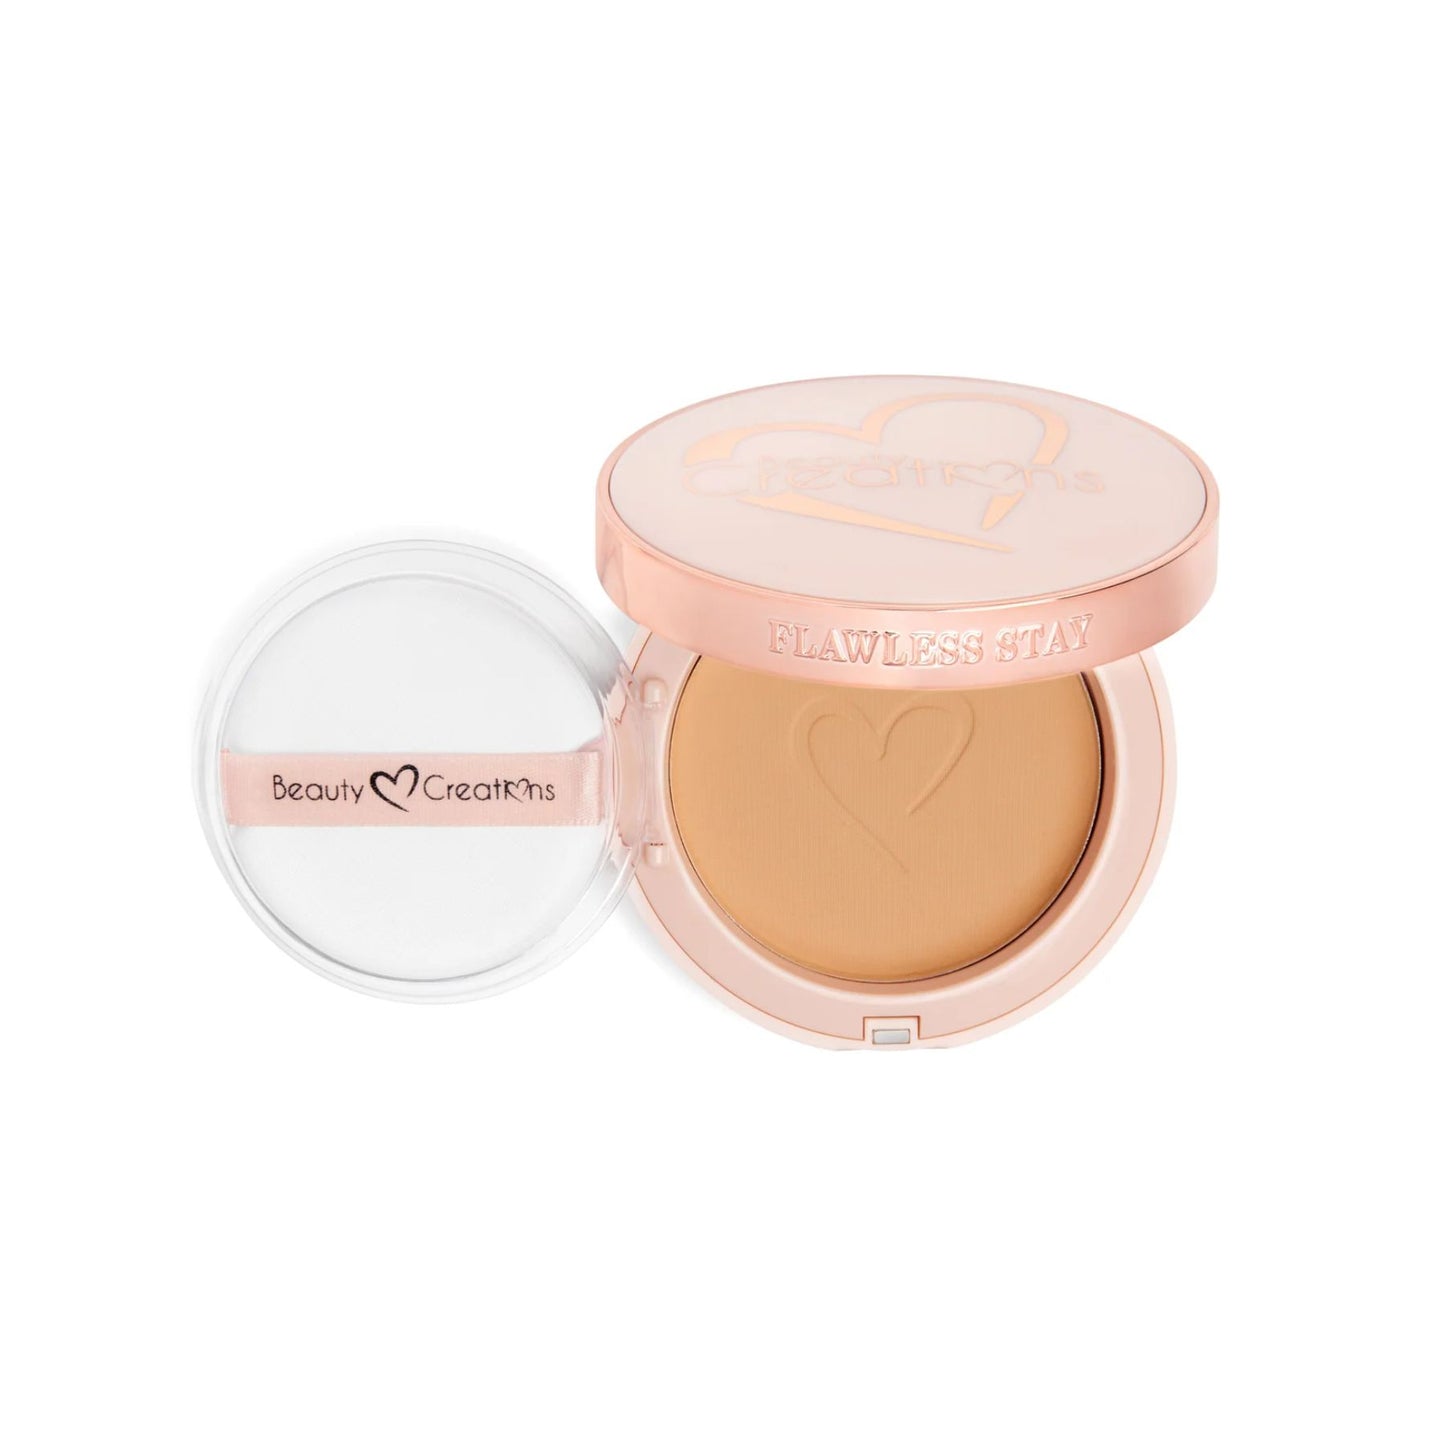 Polvo Compacto FLAWLESS STAY POWDER FOUNDATION BEAUTY CREATIONS